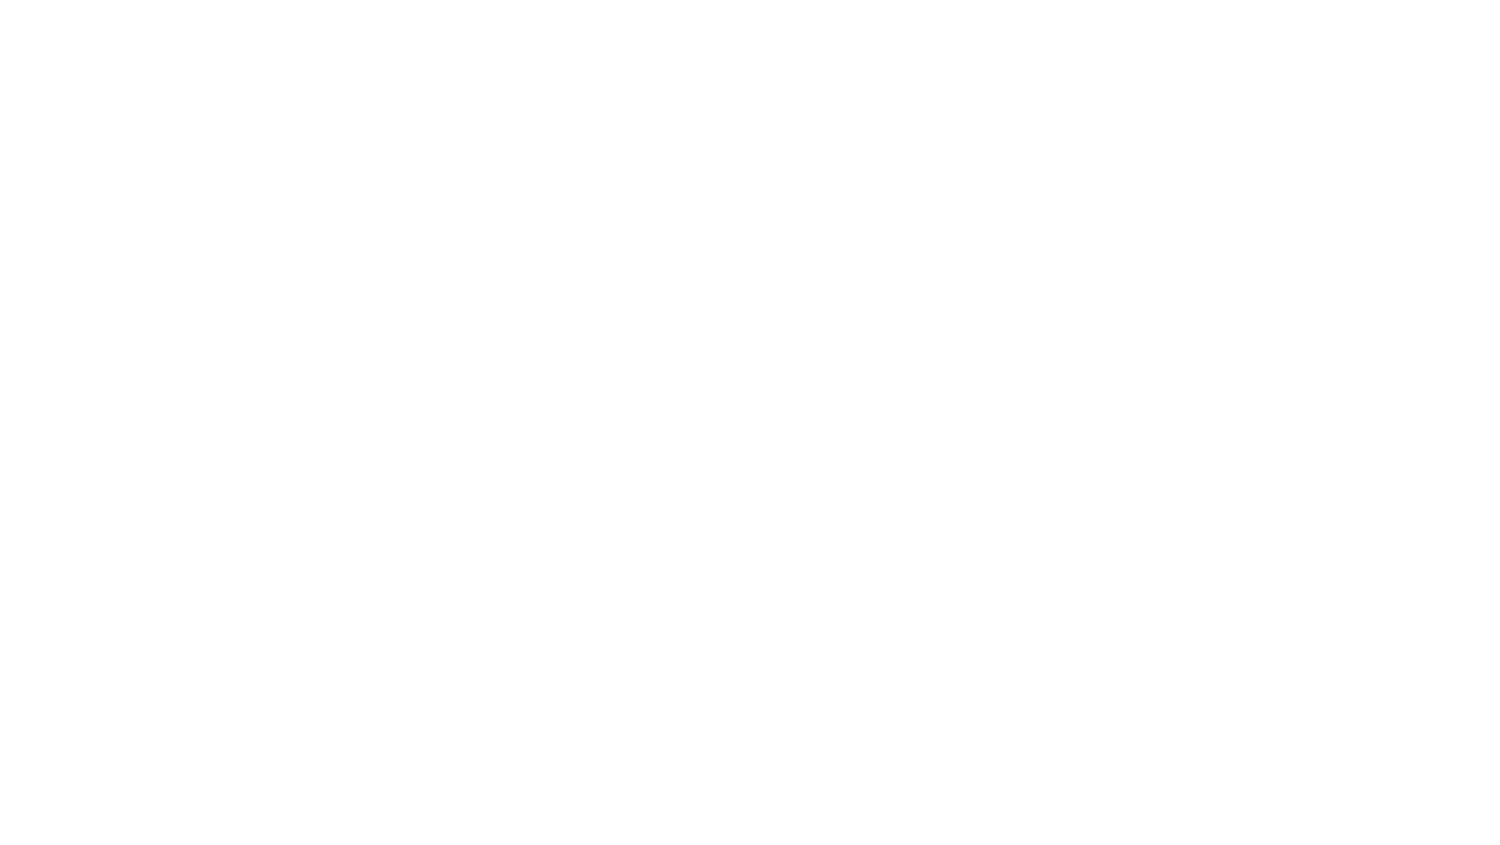 FOREVERbyHer